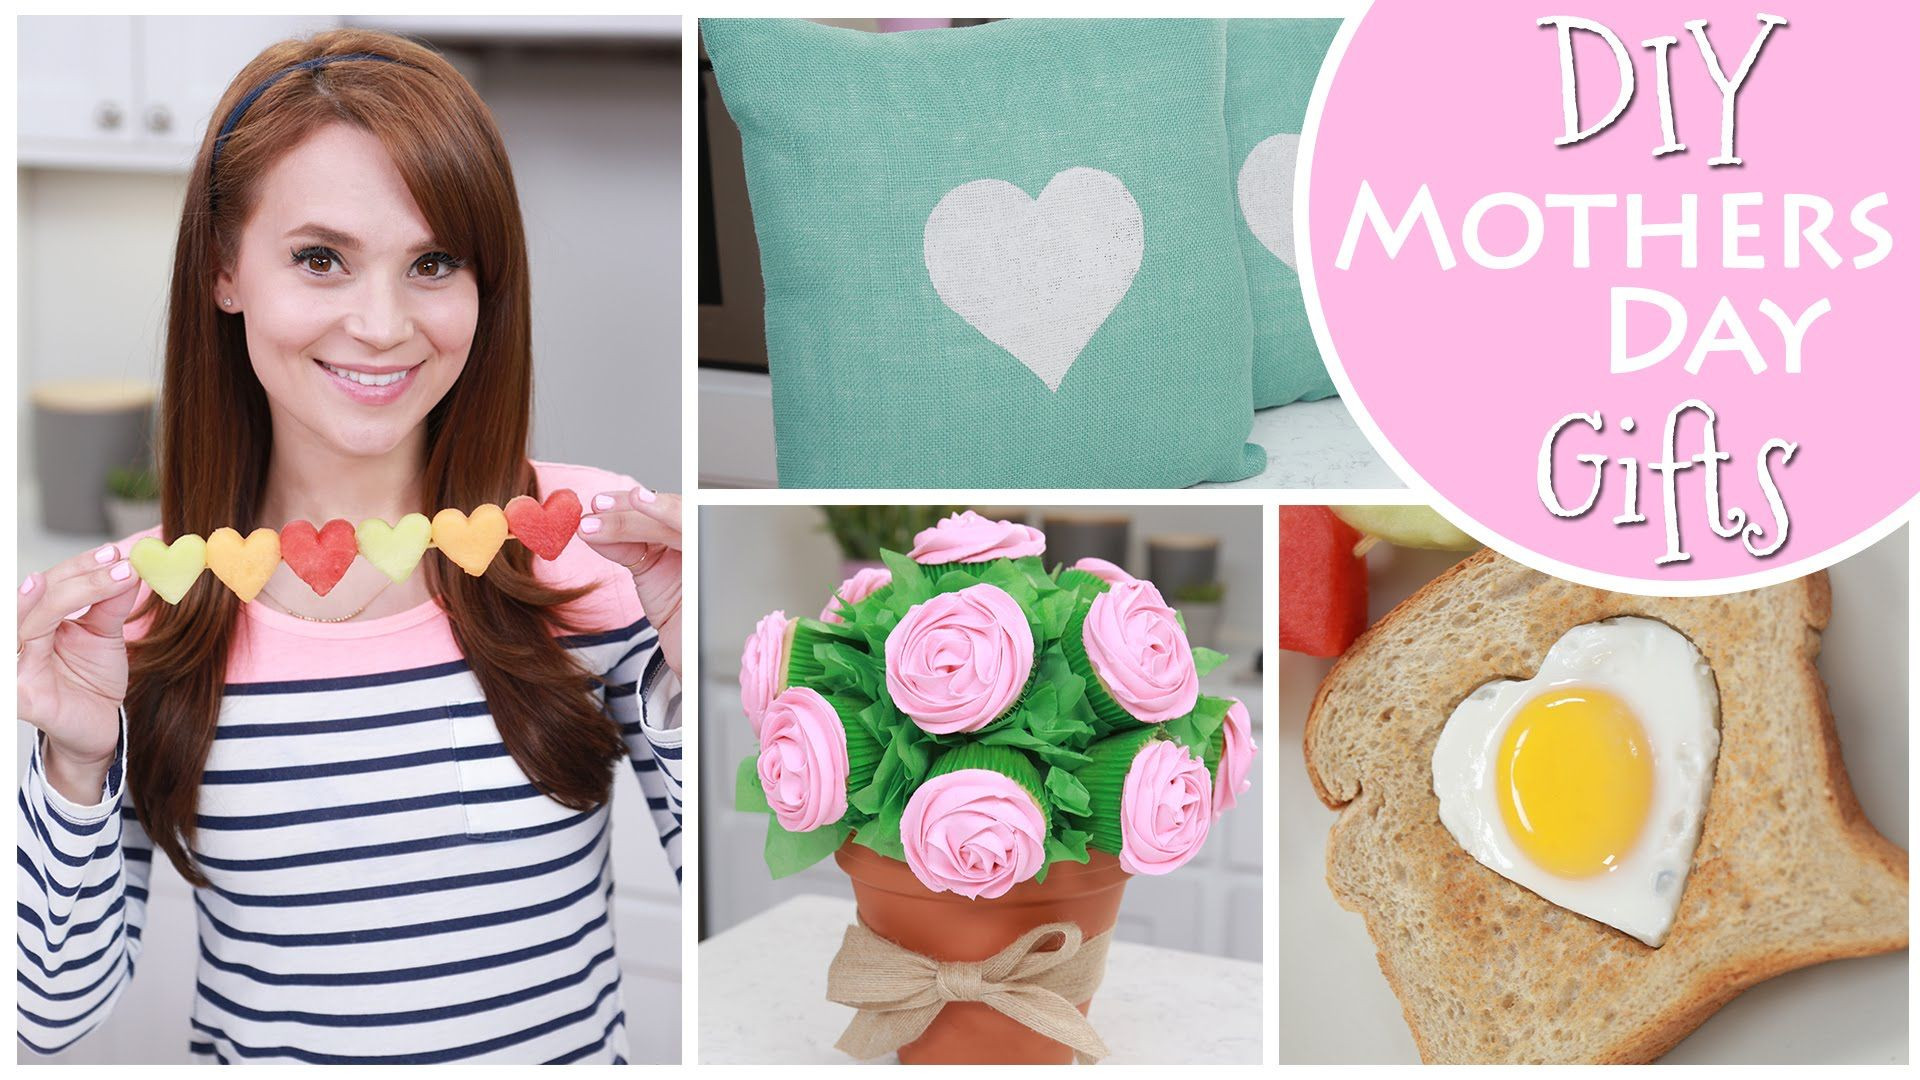 Mother Day Gift Ideas Homemade
 DIY MOTHERS DAY GIFT IDEAS Videos